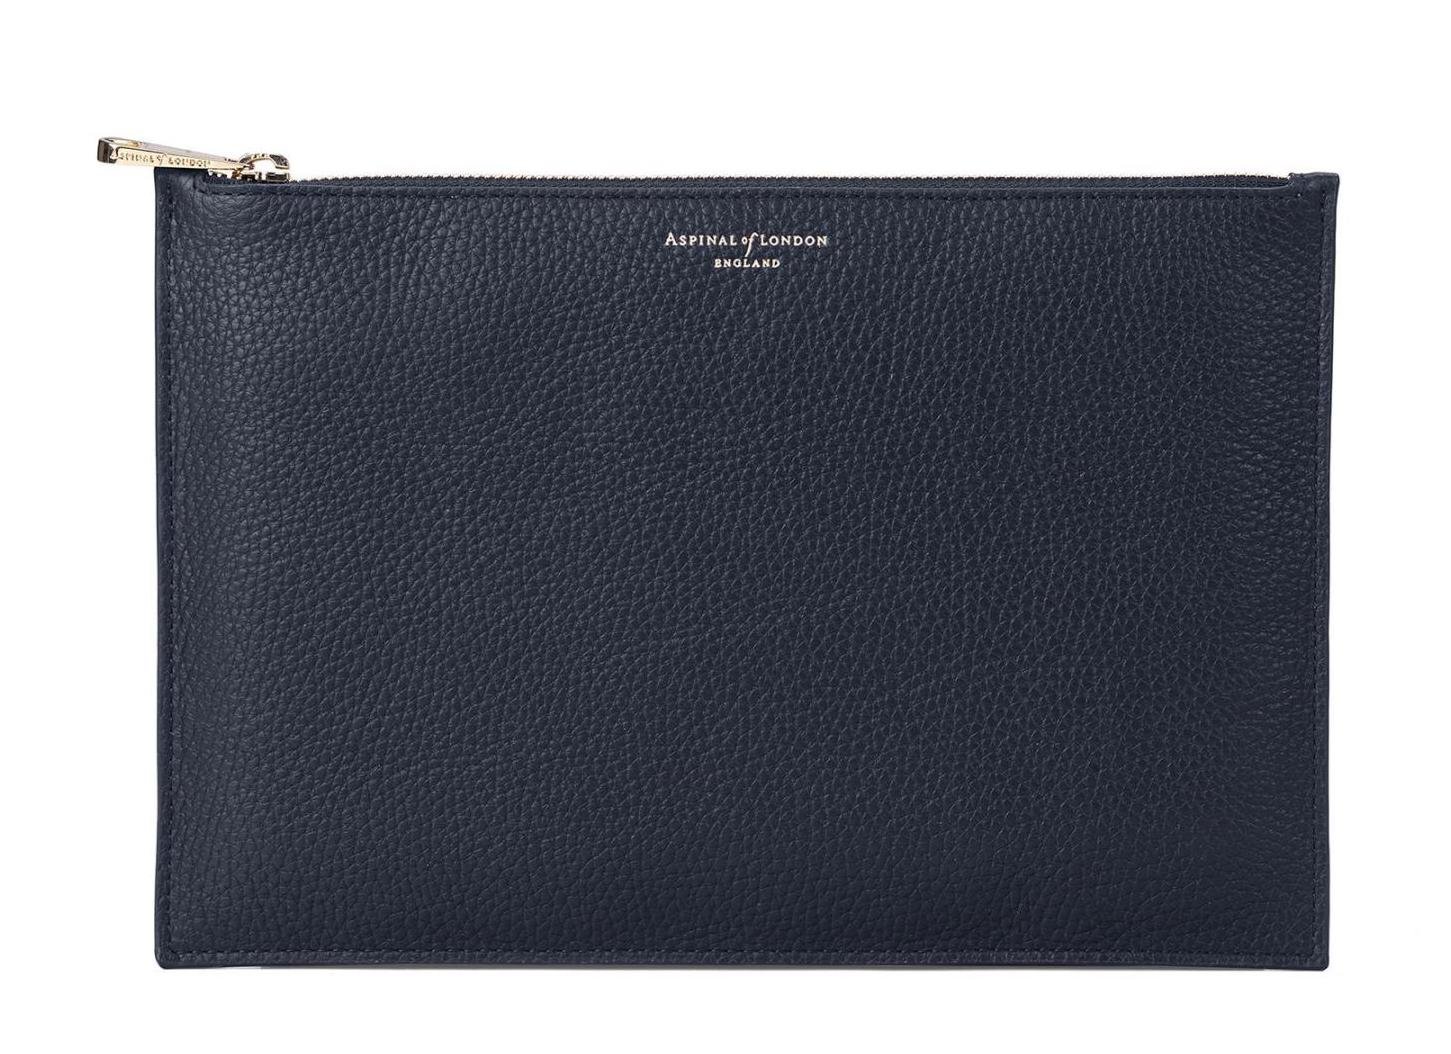 womens-clutch-evening-bags-aspinal-of-london-large-essential-flat-pouch-navy-pebble.jpeg